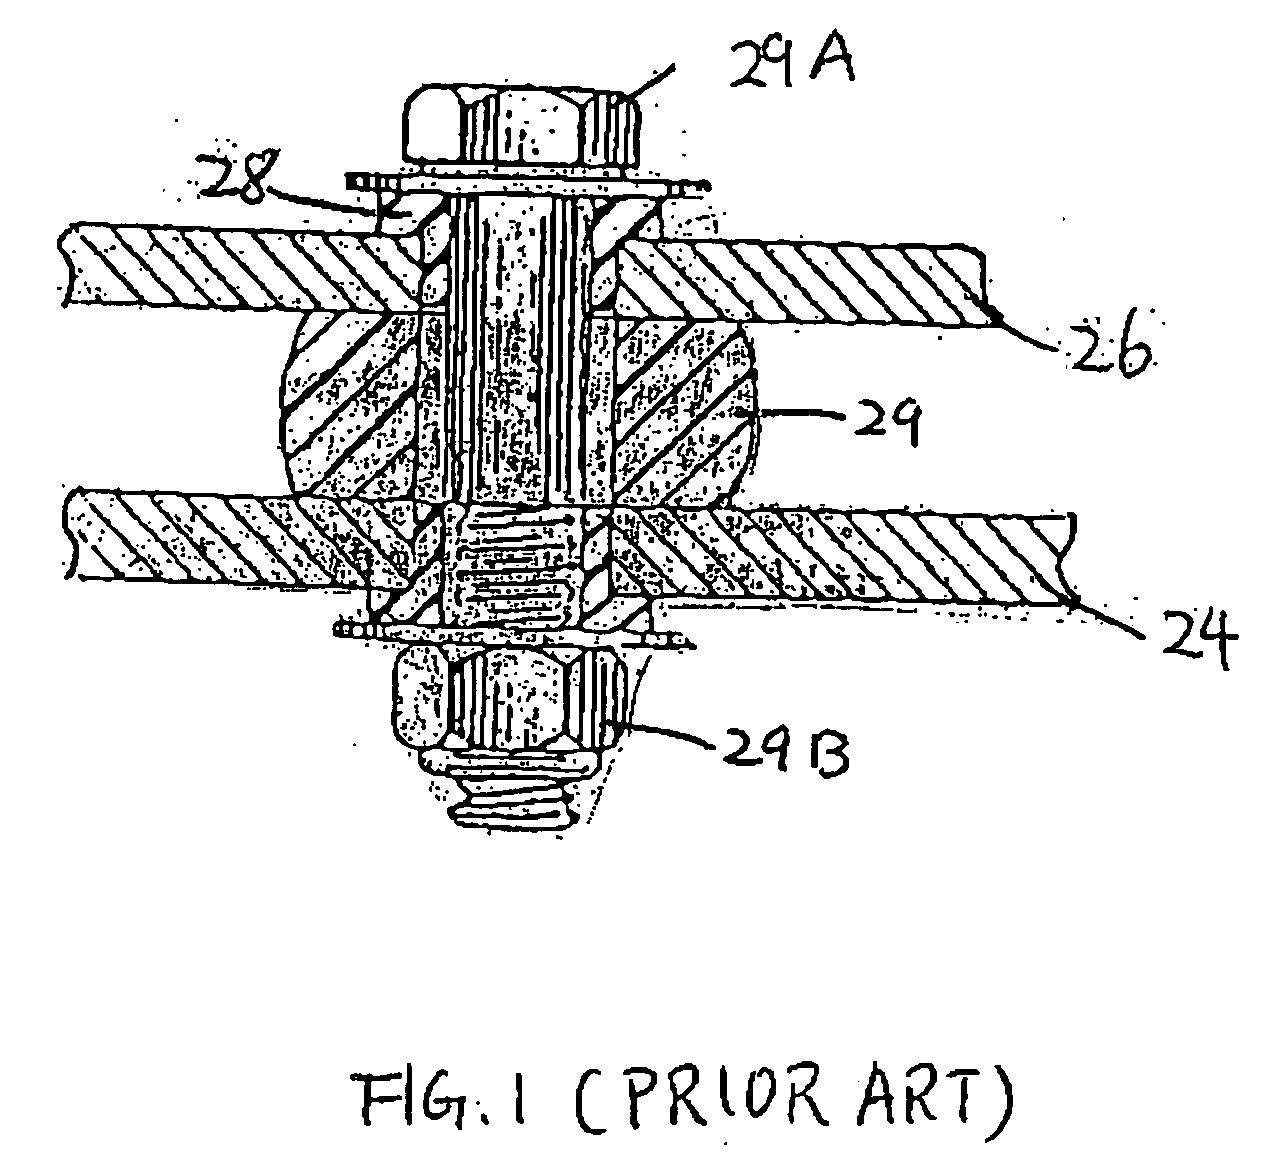 Constrained layer damping assembly